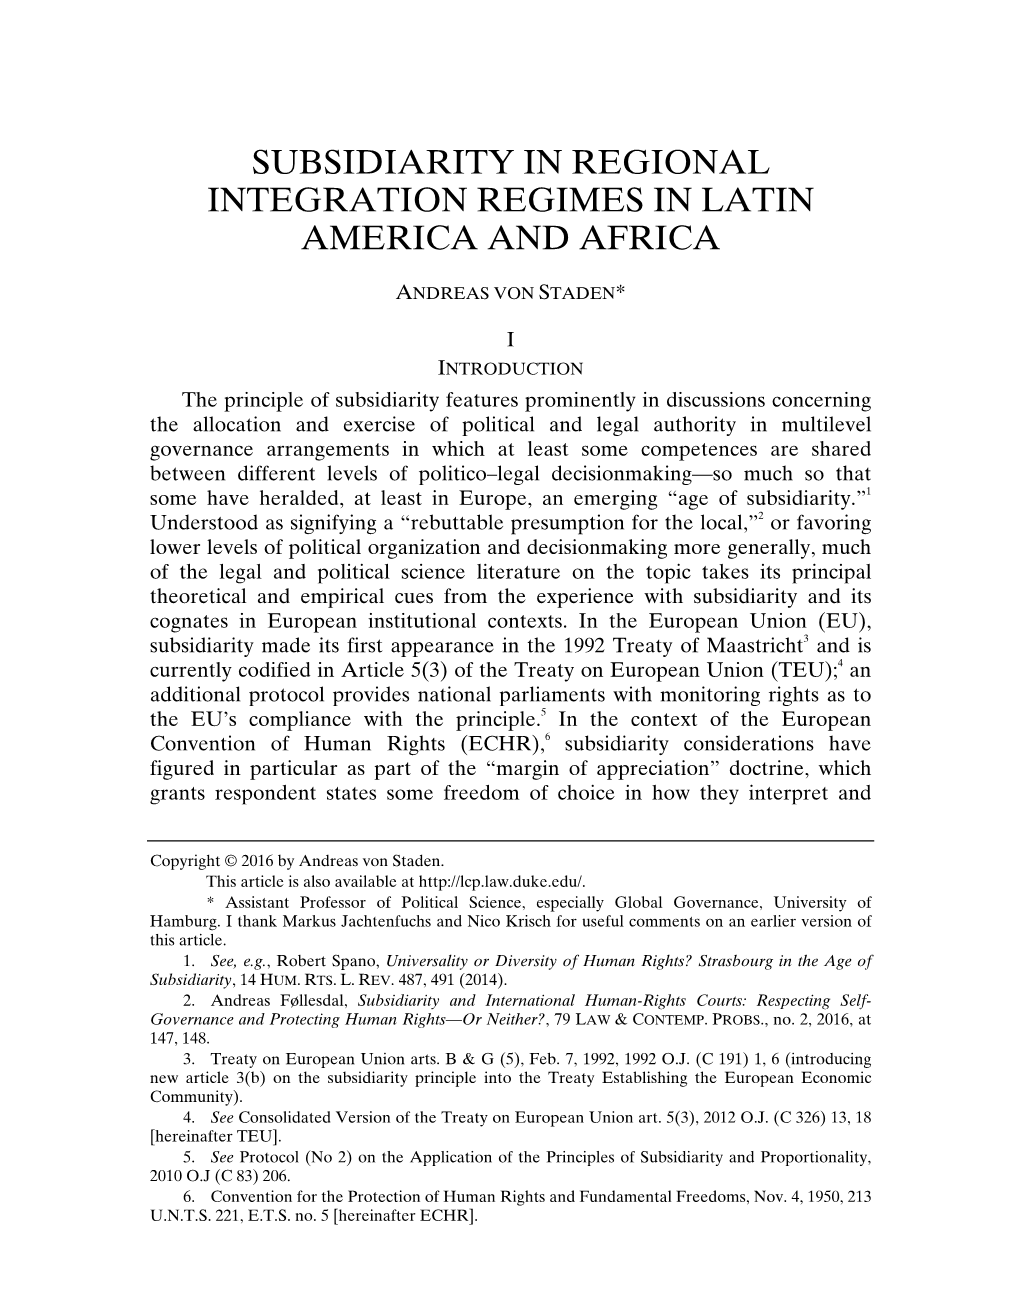 Subsidiarity in Regional Integration Regimes in Latin America and Africa